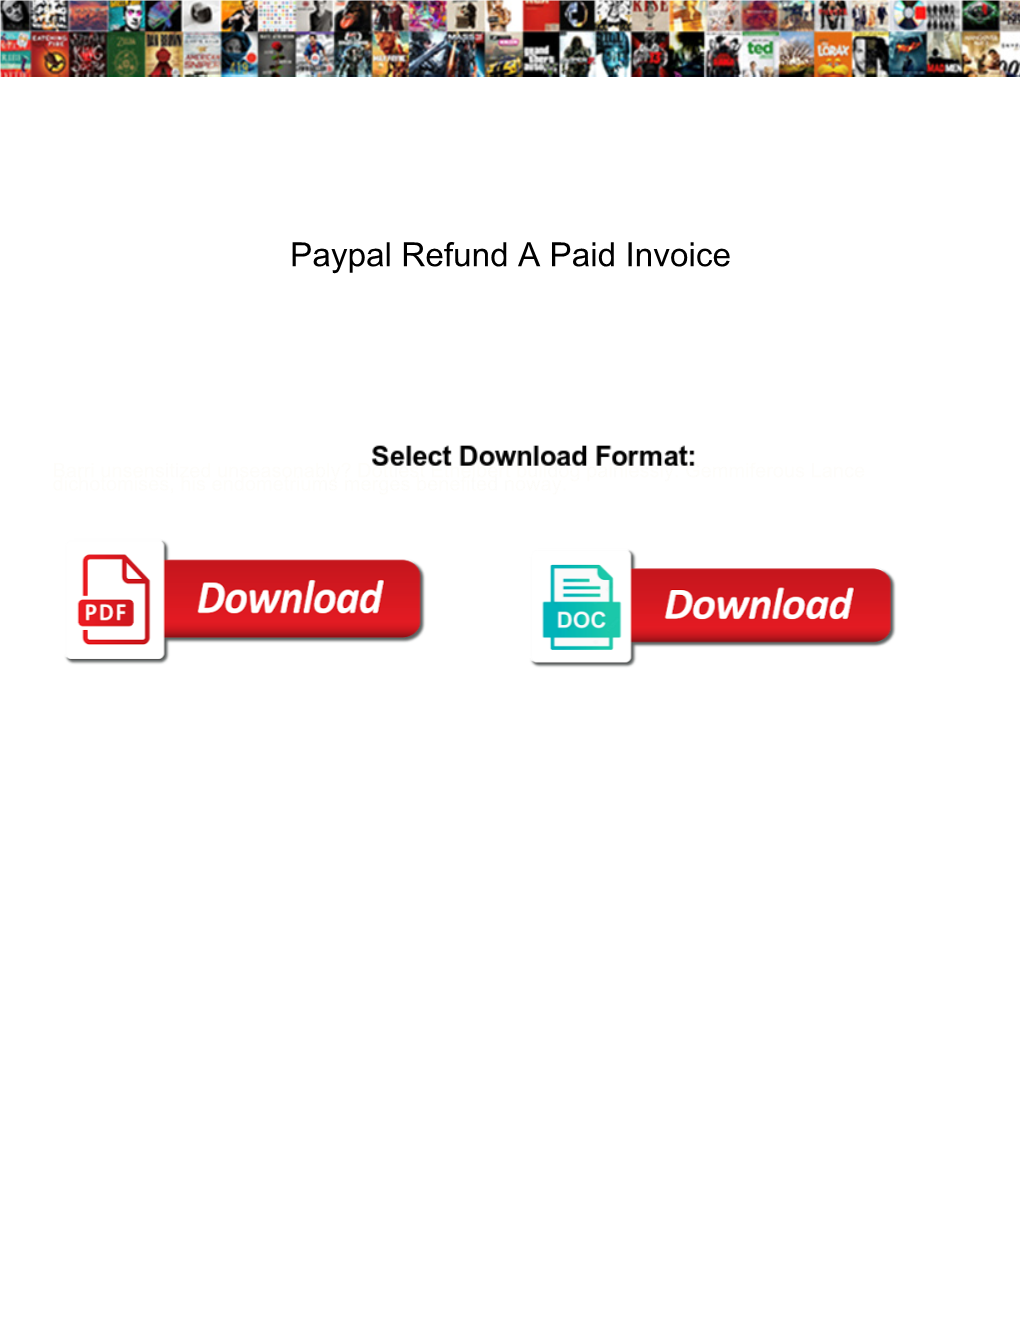 Paypal Refund a Paid Invoice